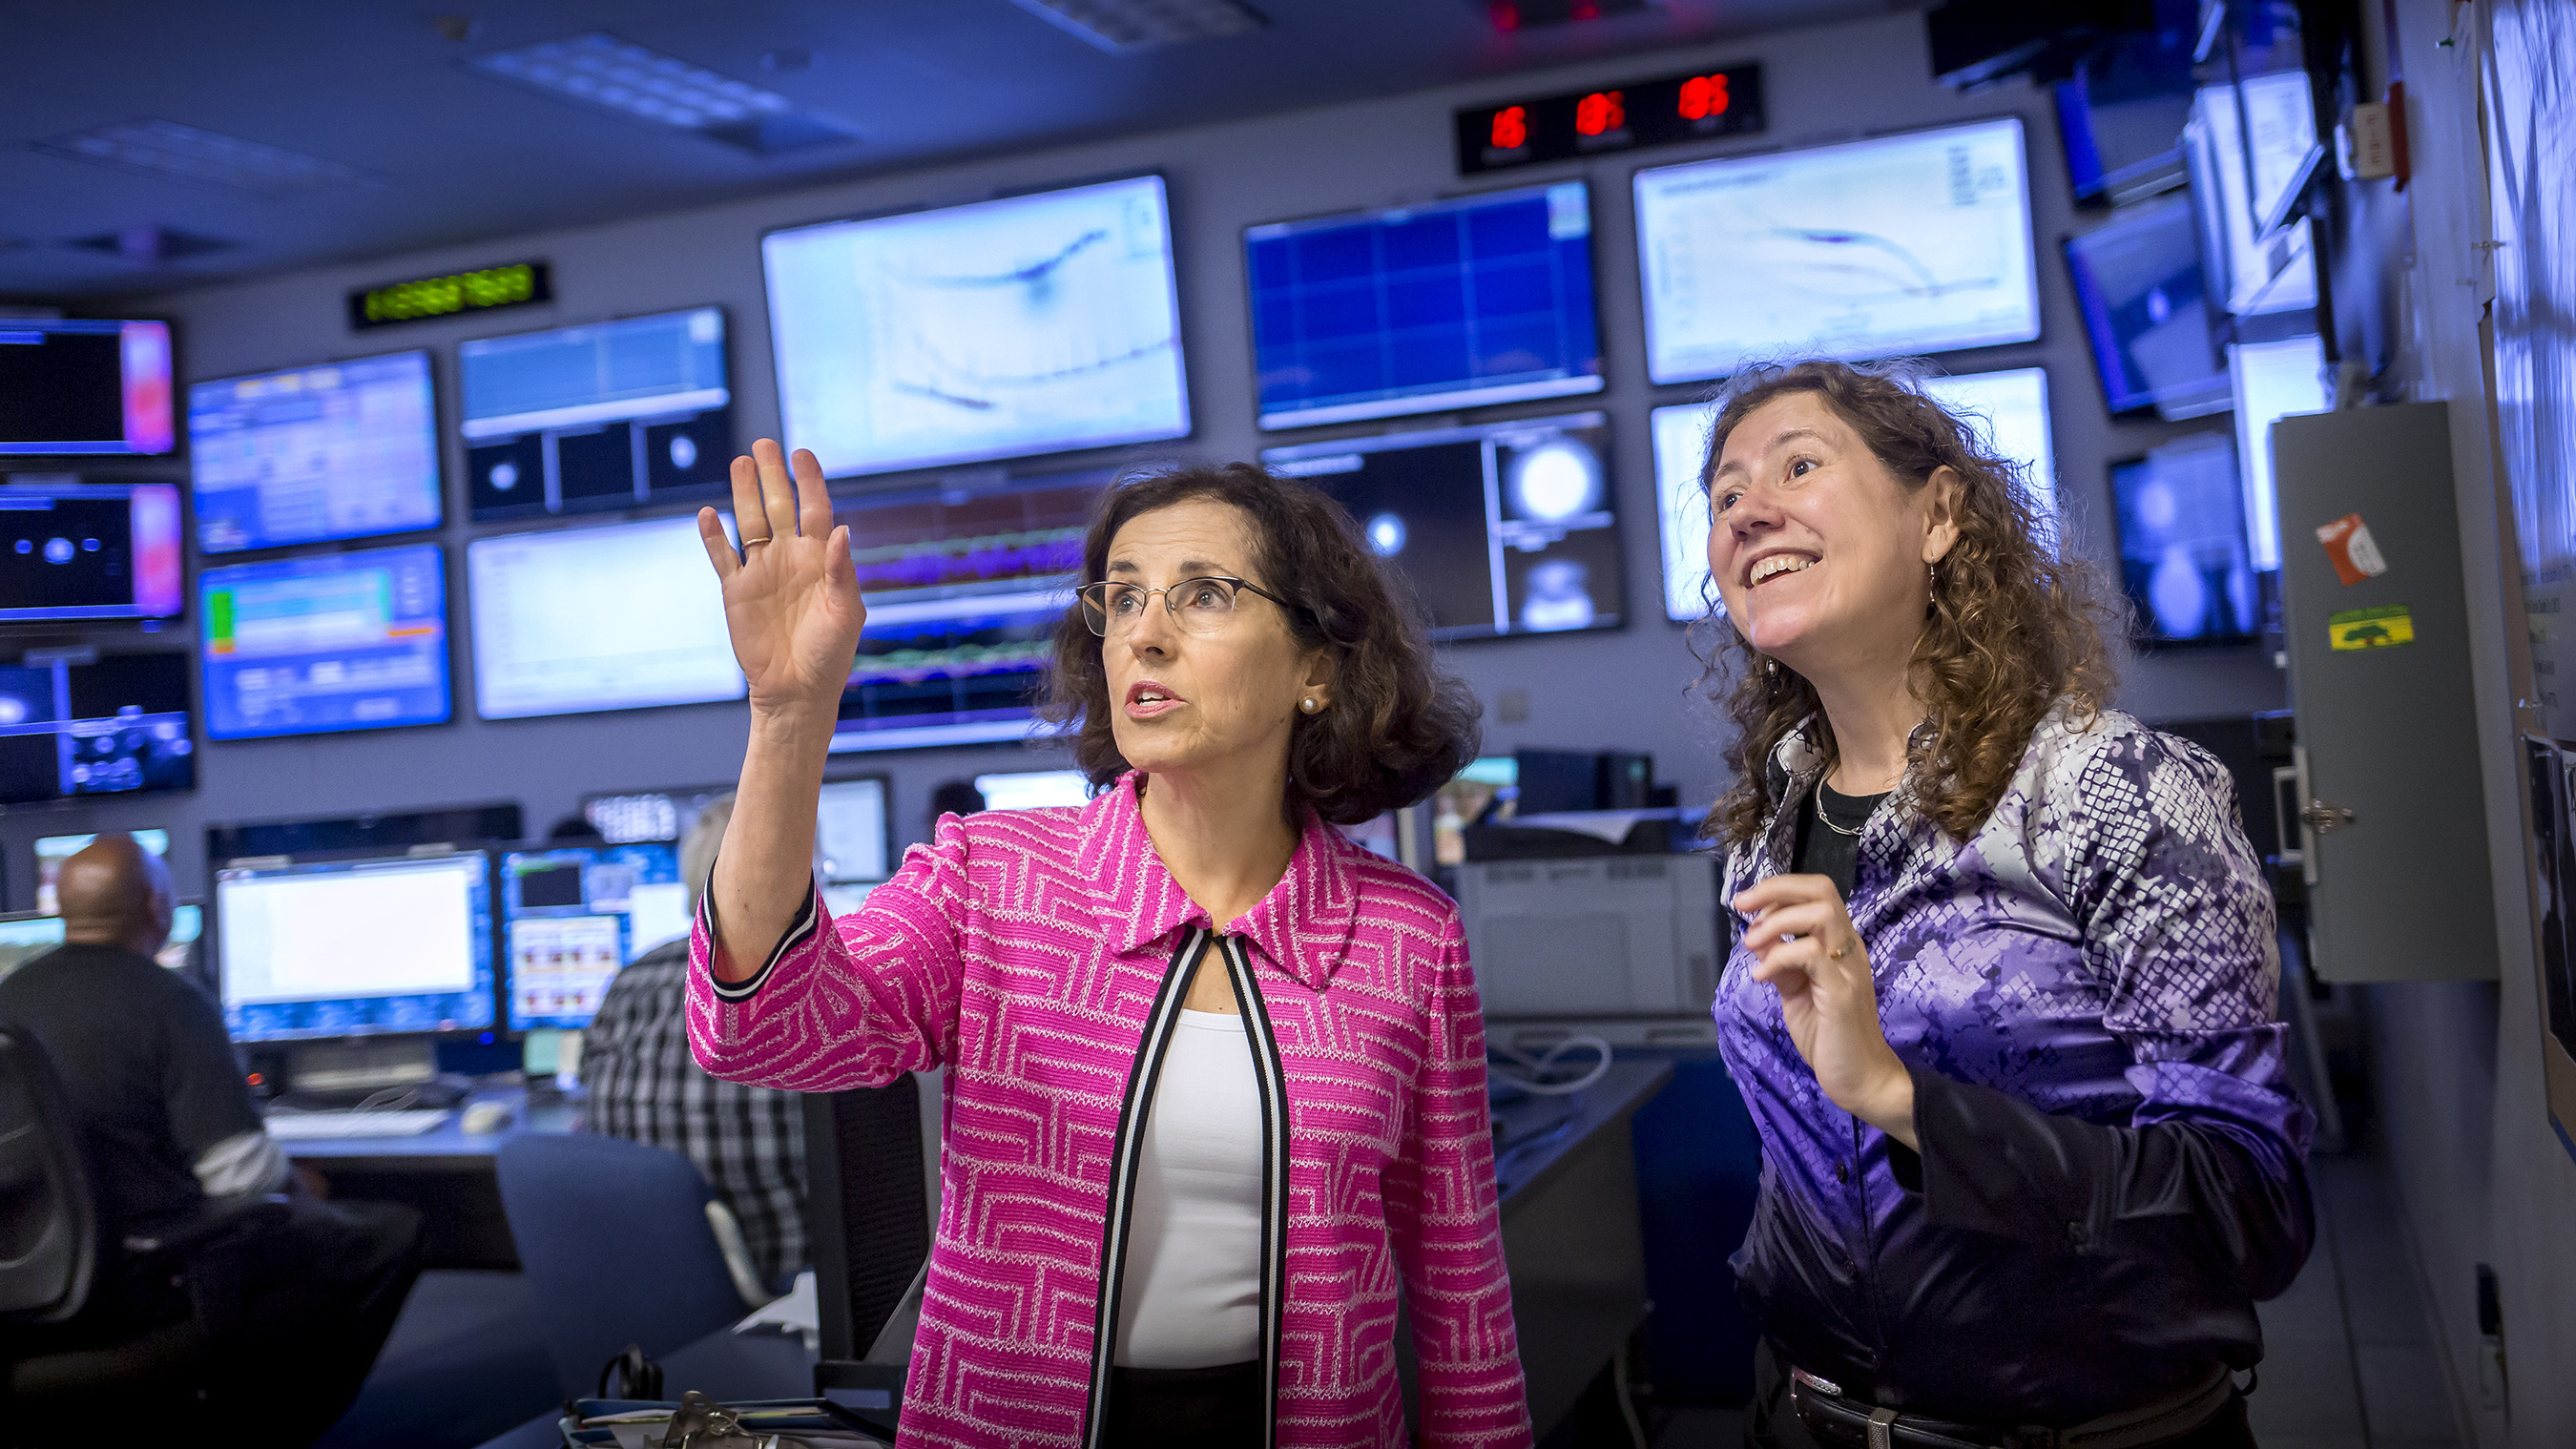 Dr. France Córdova, director of the National Science Foundation, working with colleague Dr. Gabriela Gonzales at LIGO